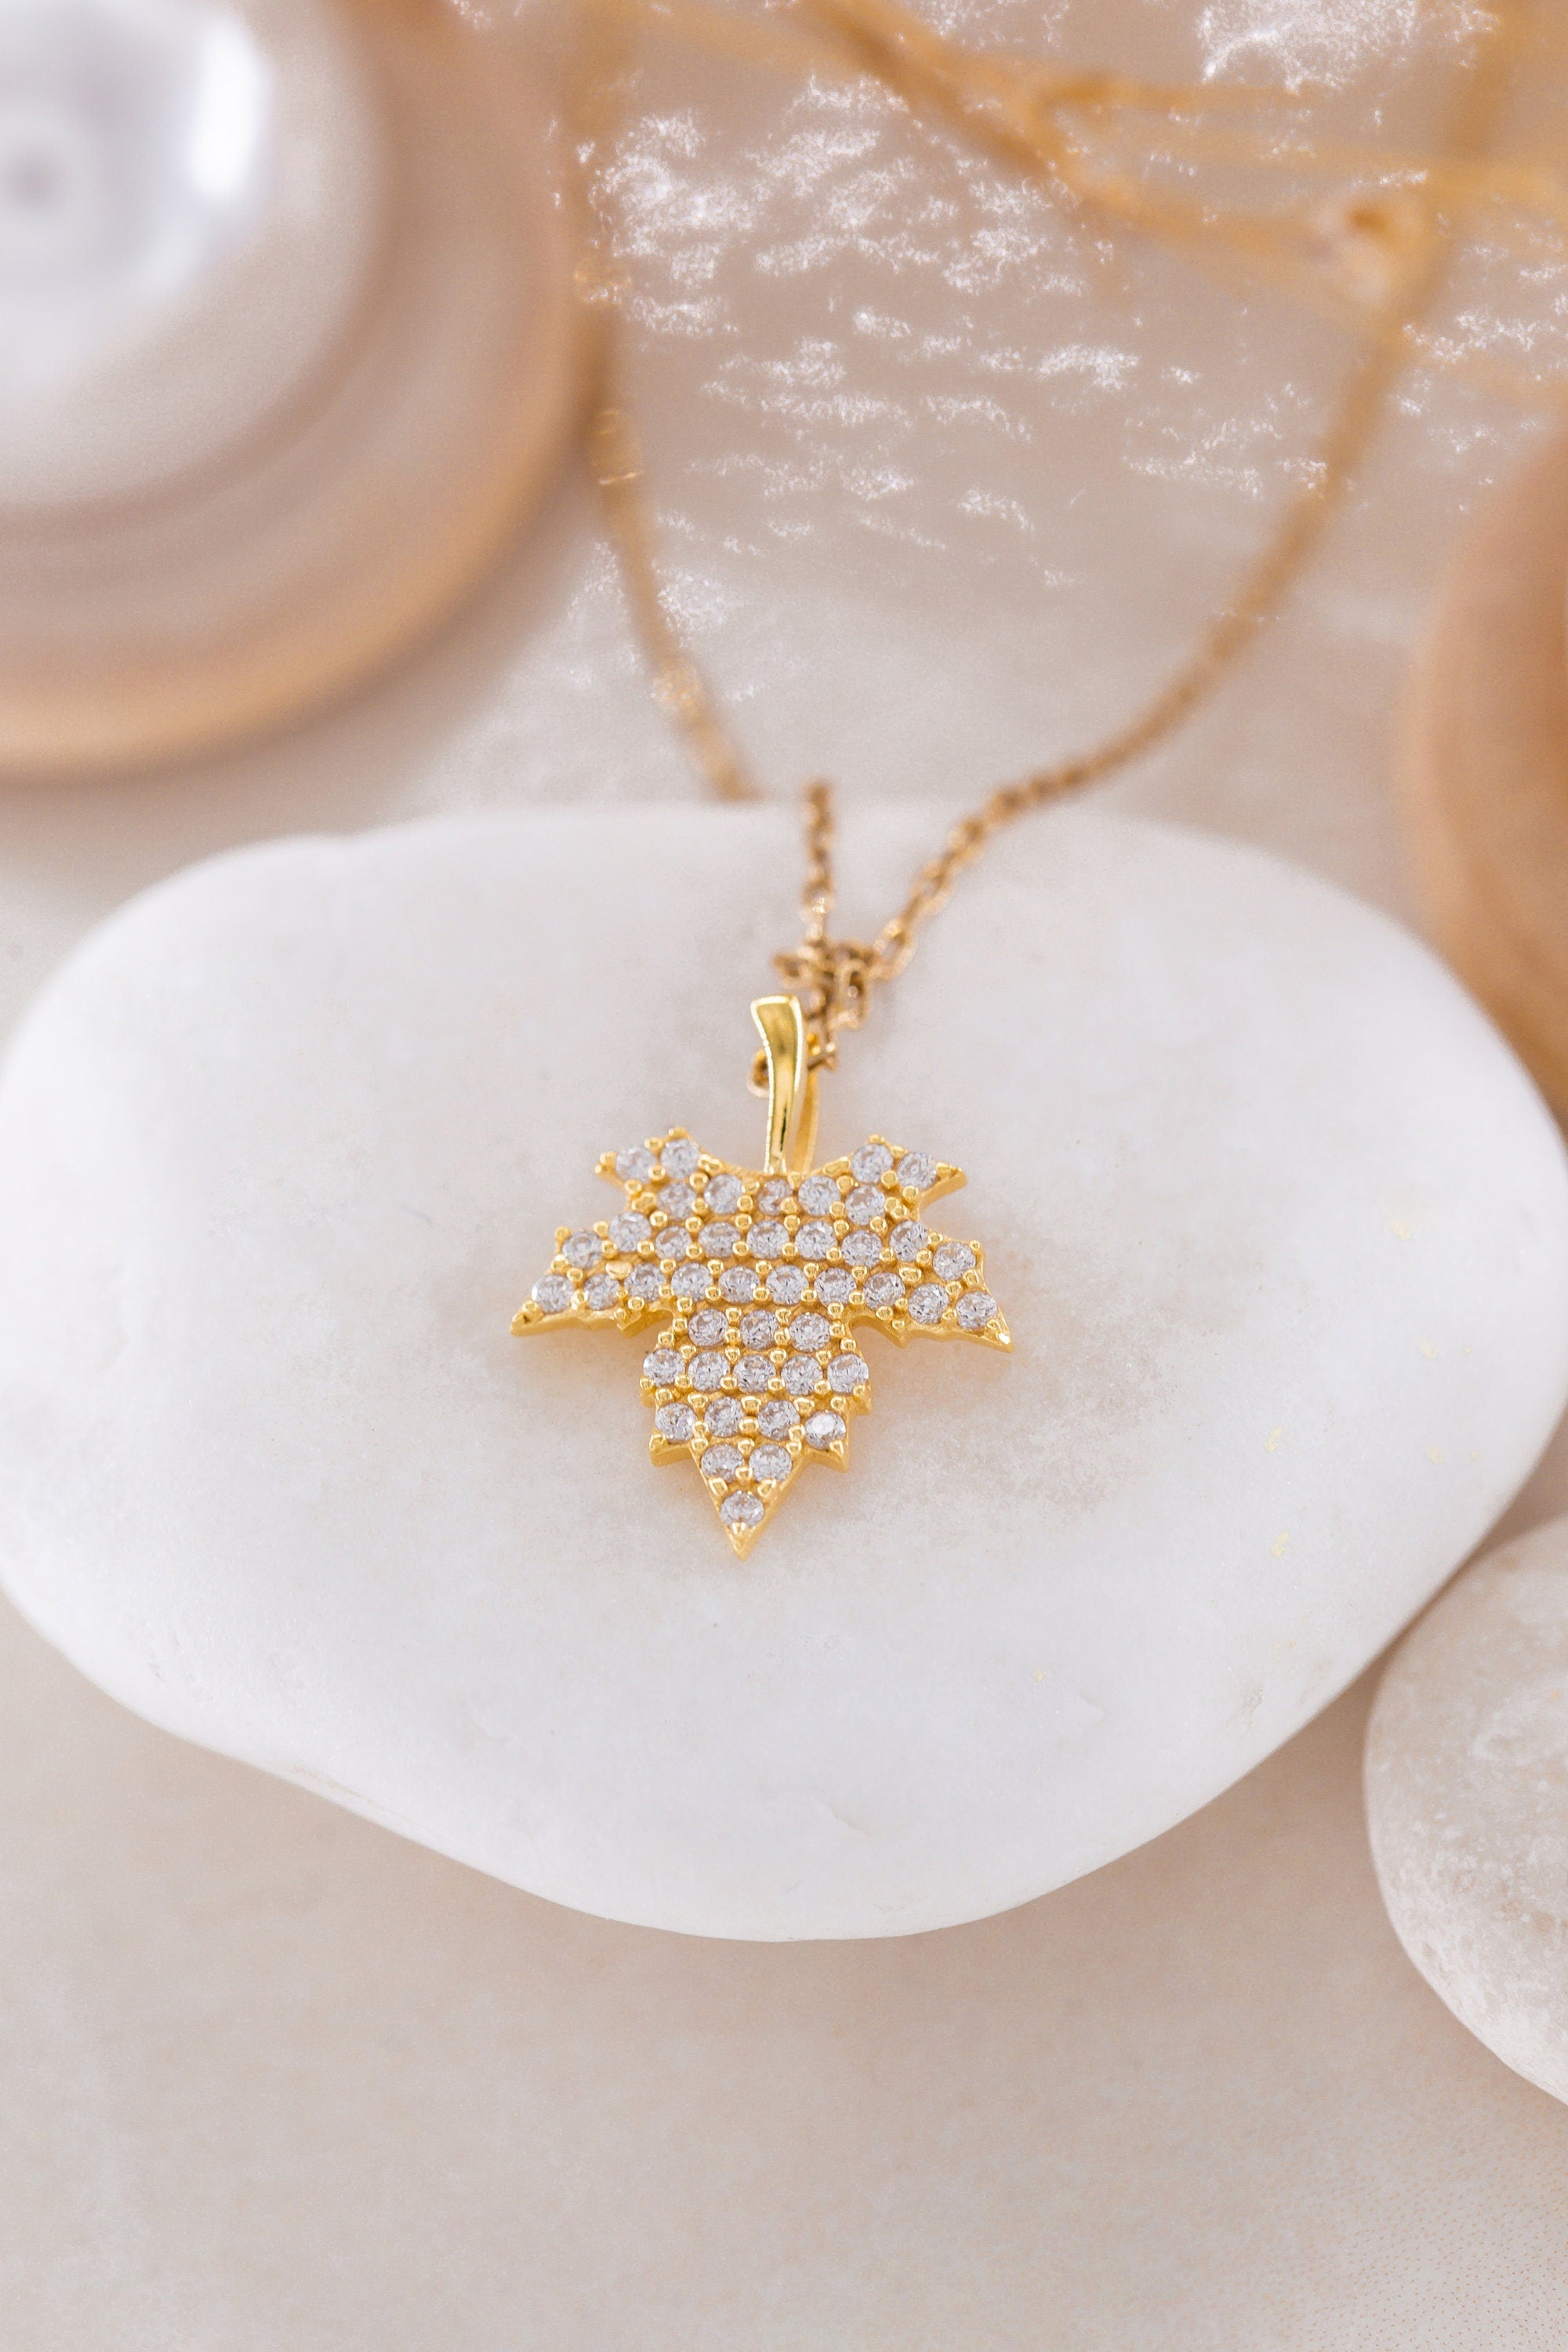 14K Symbol of Canada: Maple Leaf Necklace, 925 Exquisite Design Rustic Maple Leaf Necklace, Gold Maple Leaf Pendant, Spouse Necklace Gift